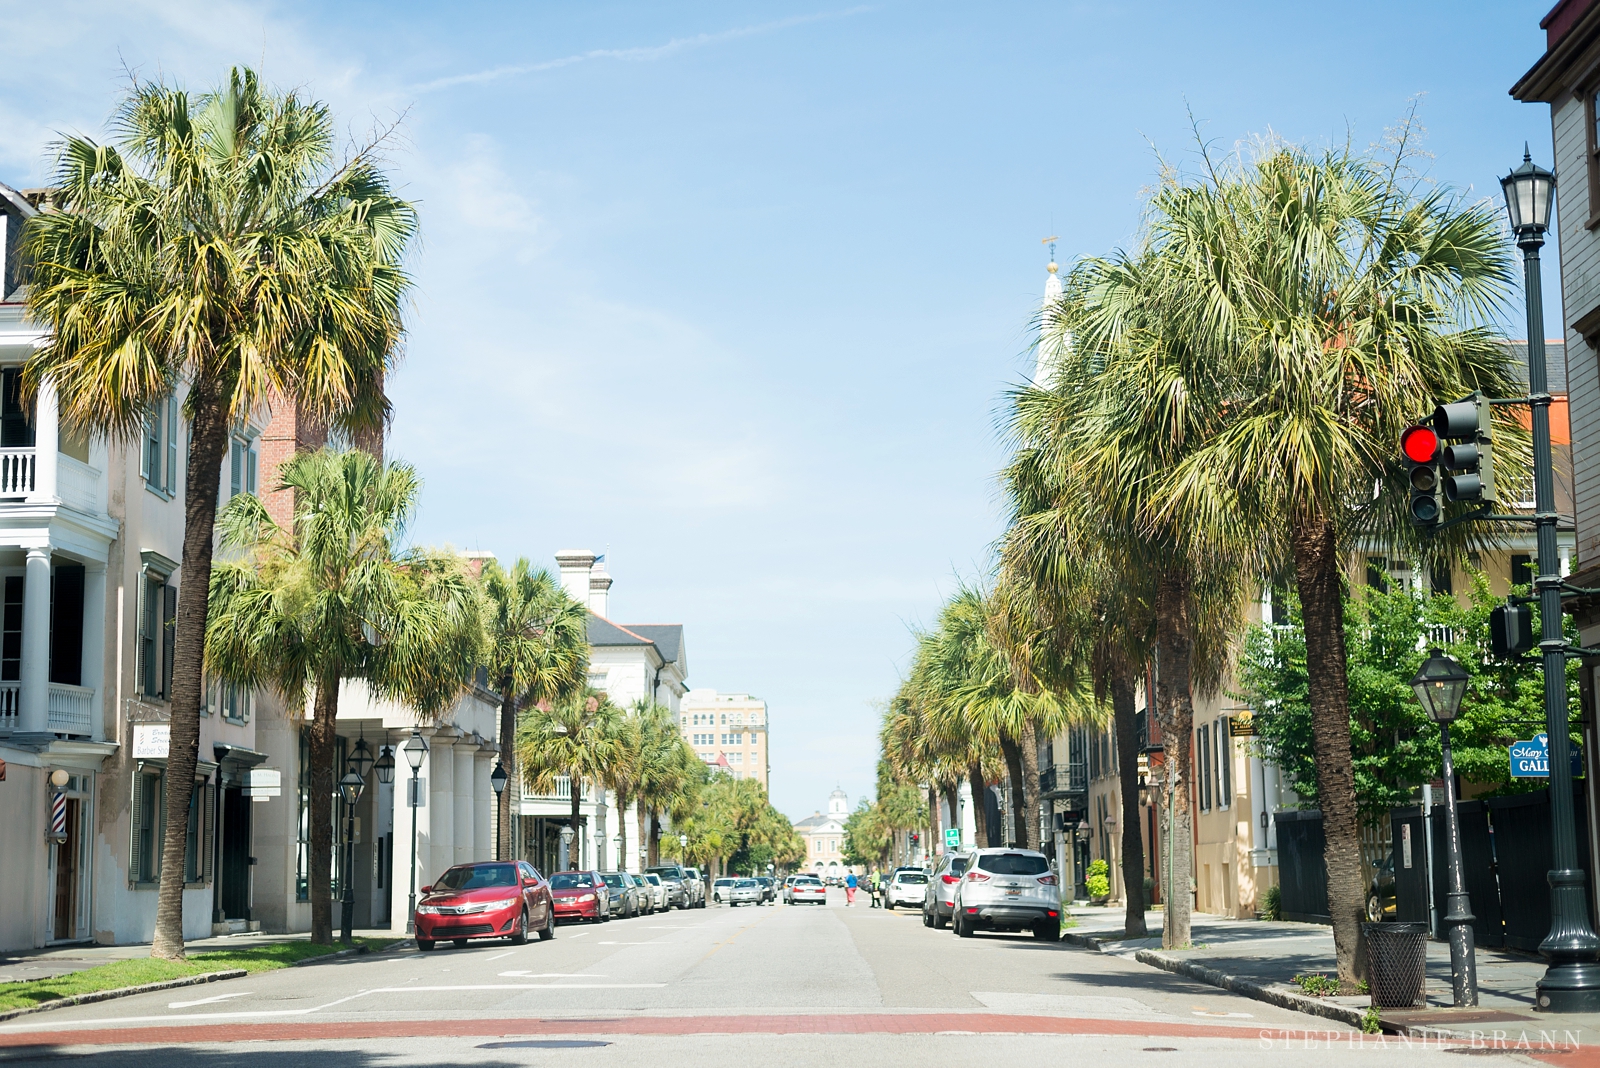 palm-trees-lining-the-street-in-downtown